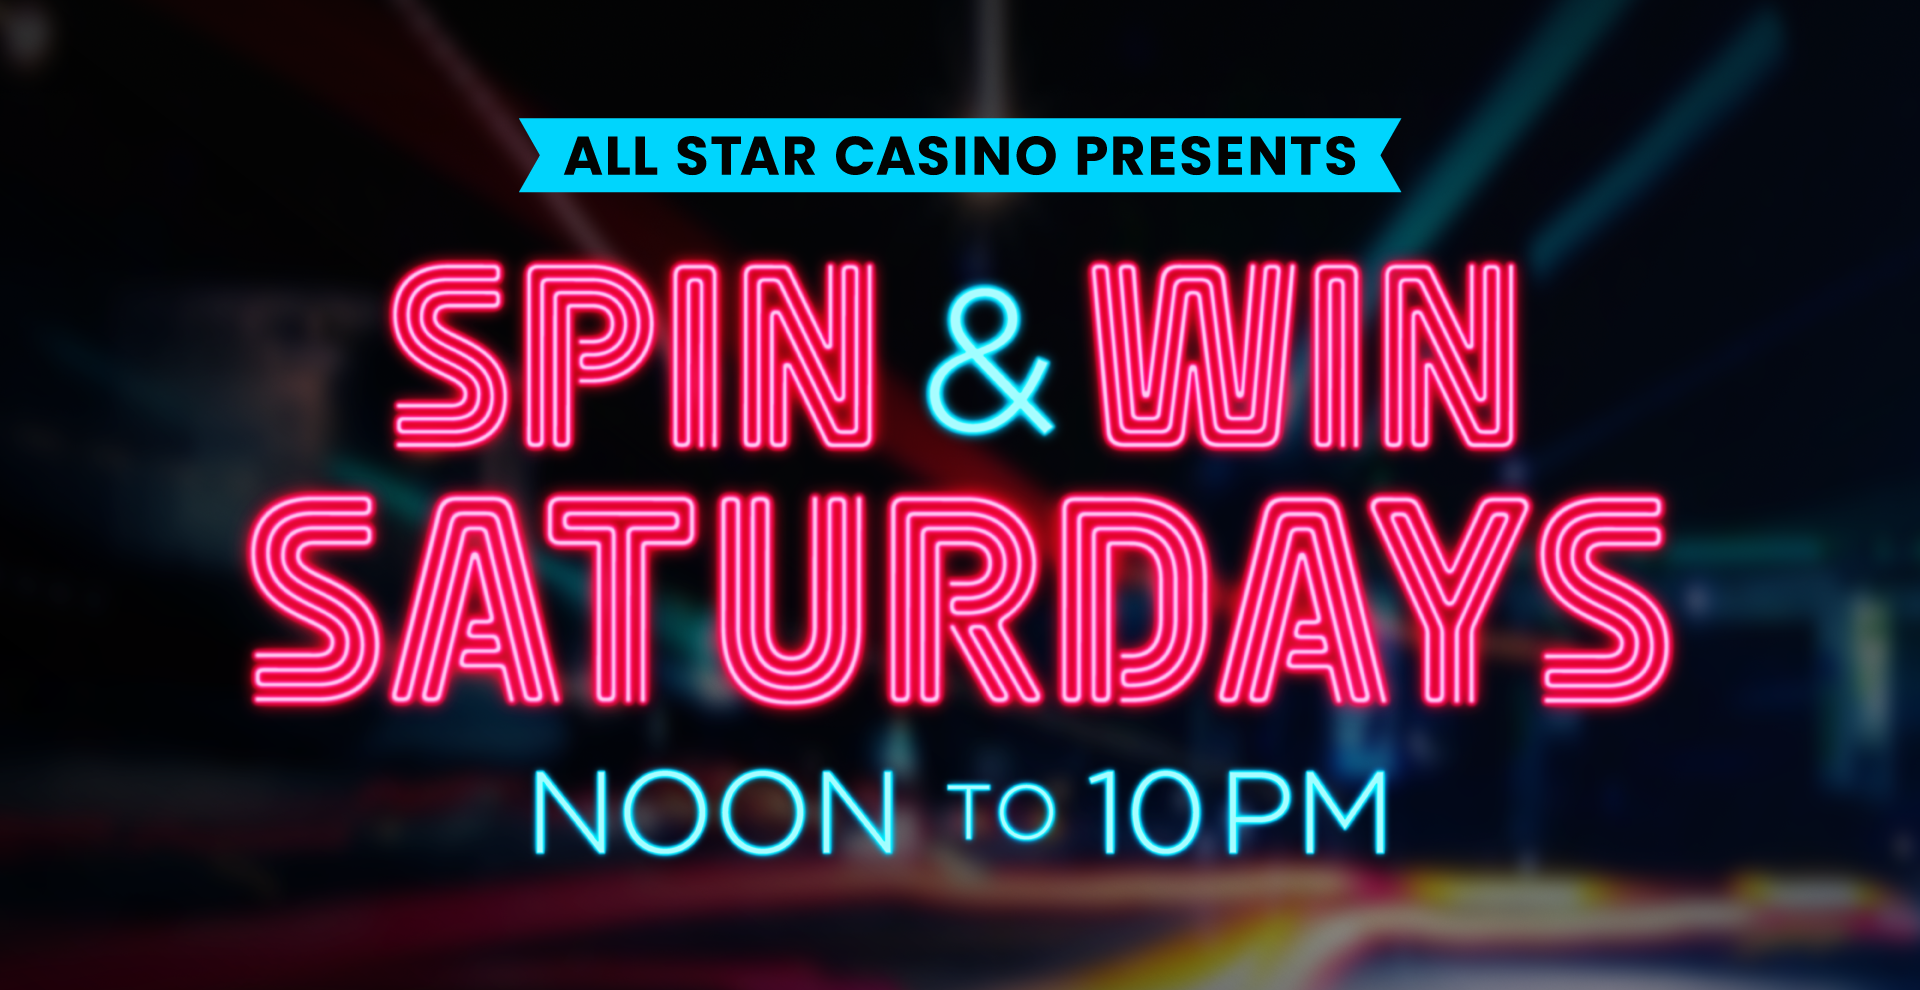 All Star Lanes and Casino | Spin and Win Saturdays